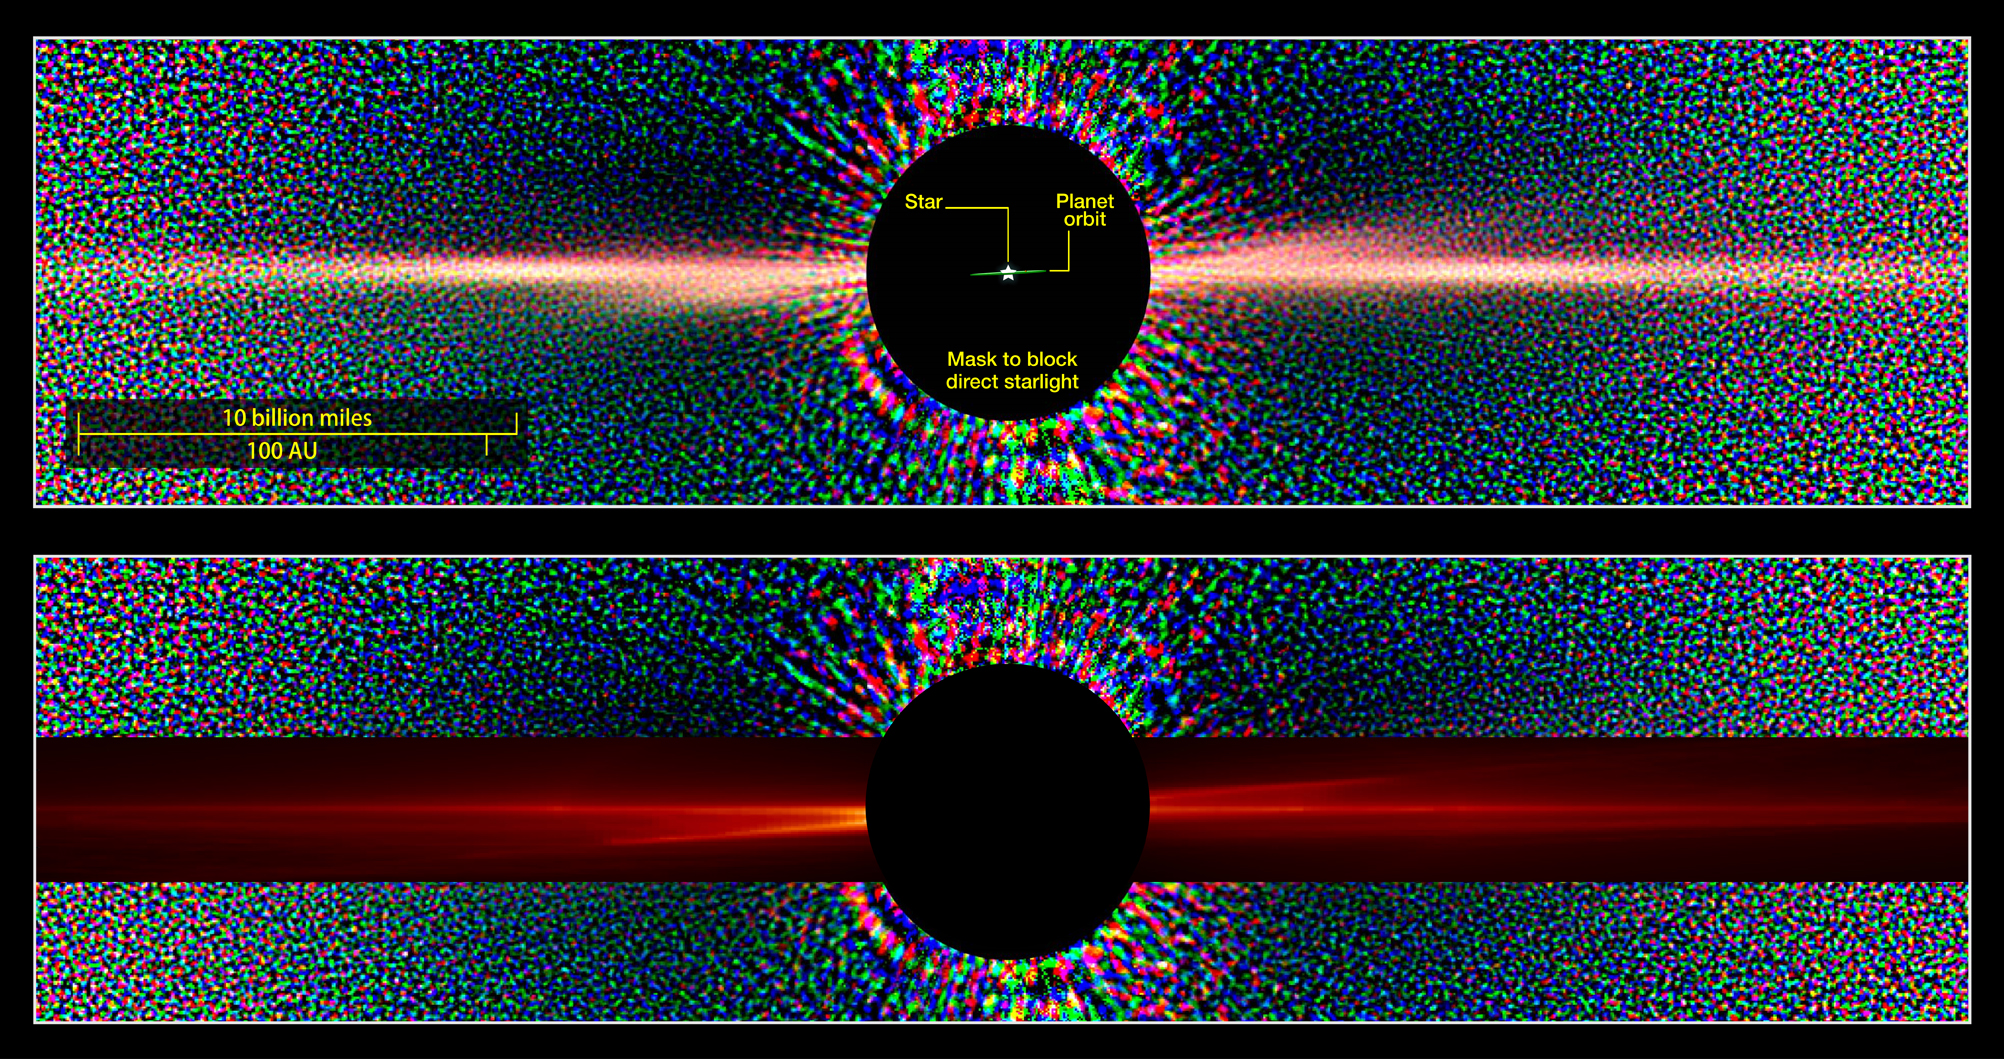 Hubble view of Beta Pictoris in scattered light (top) with similar view constructed from data simulation (red overlay)